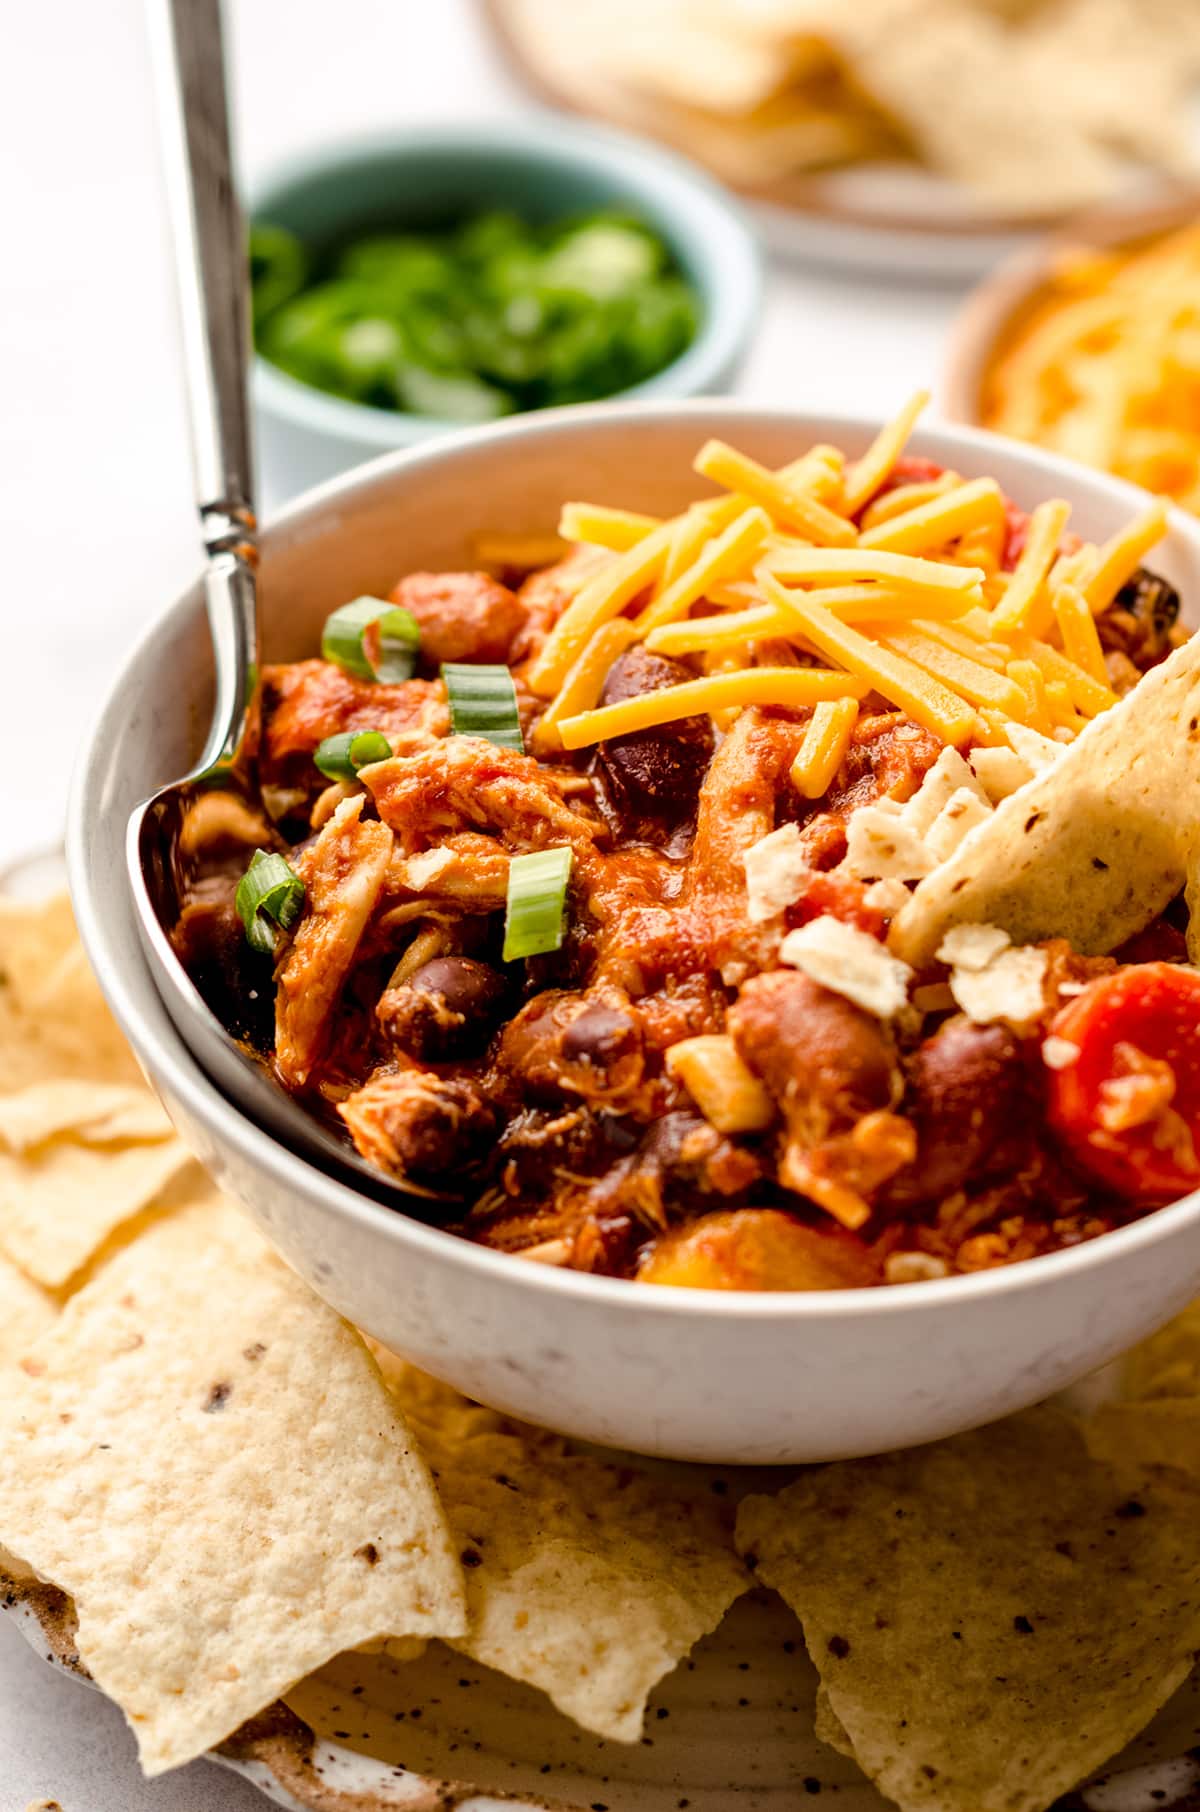 buffalo chicken chili in a bowl on a plate with tortilla chips